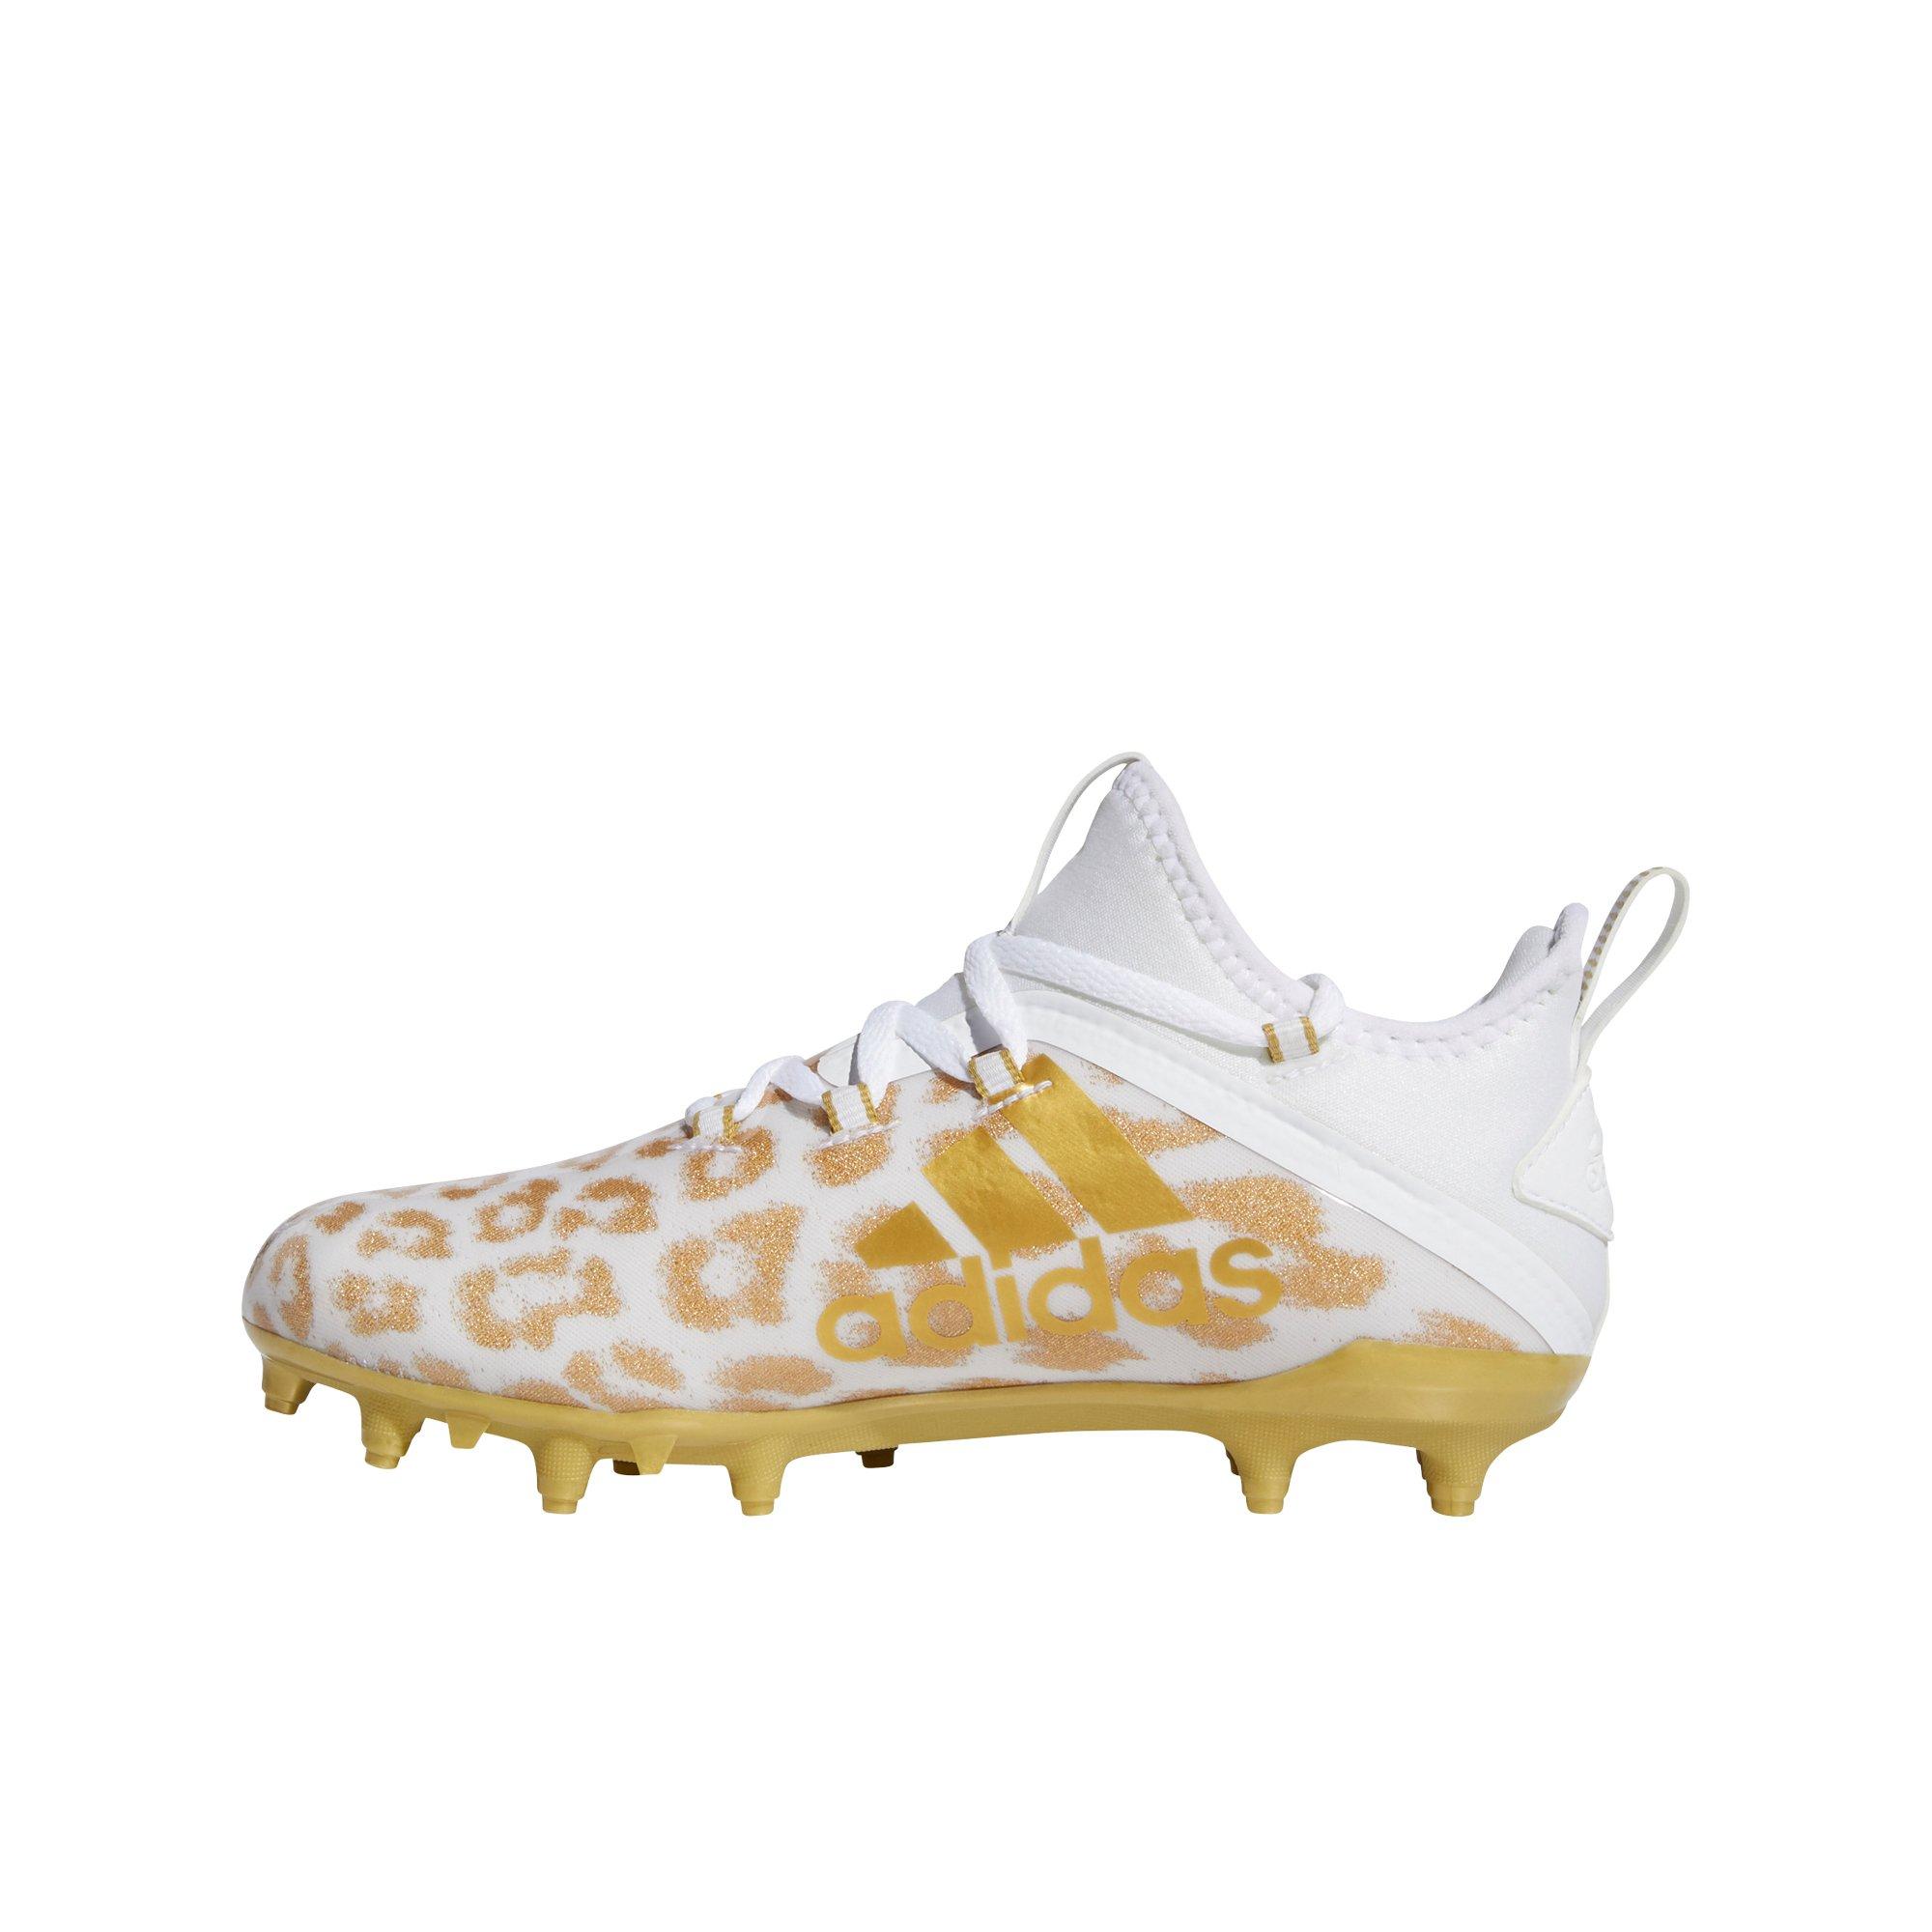 adidas football cleats gold and white